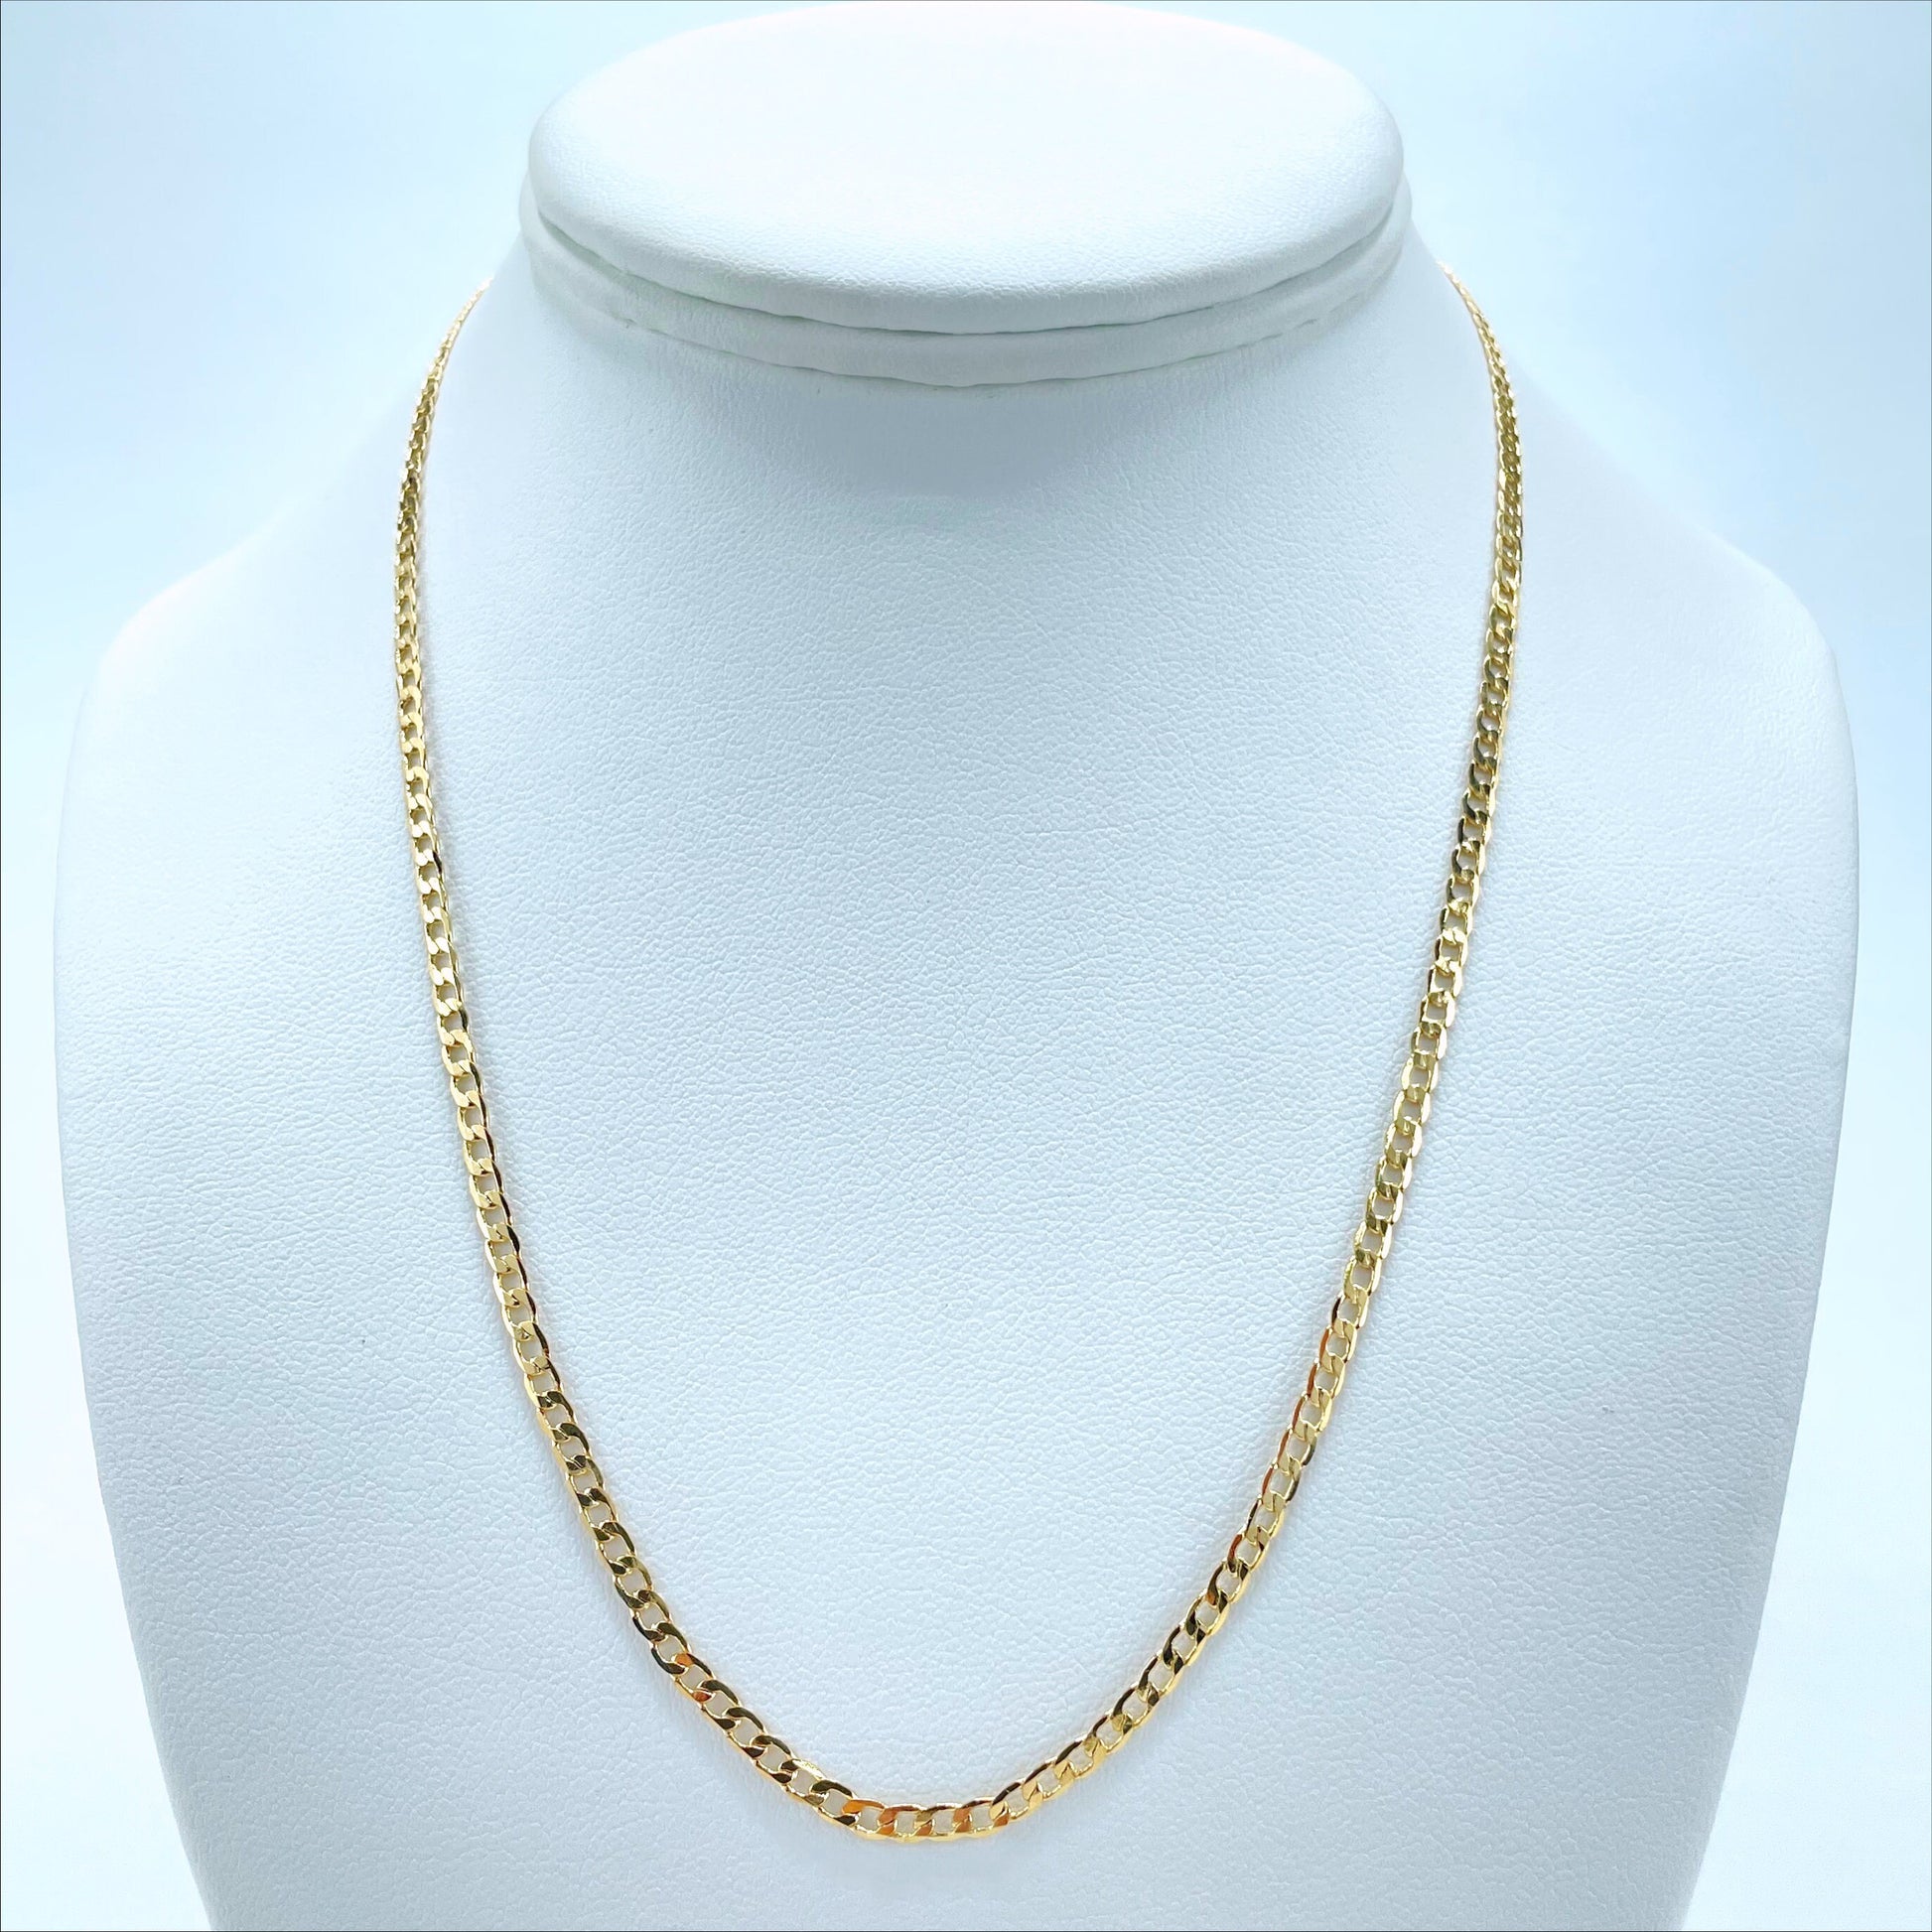 18k Gold Filled Cuban Link Chain 3mm Thickness, 16, 18, 20, 22 or 24 inches of length, Unisex Curb Link, Wholesale Jewelry Making Supplies